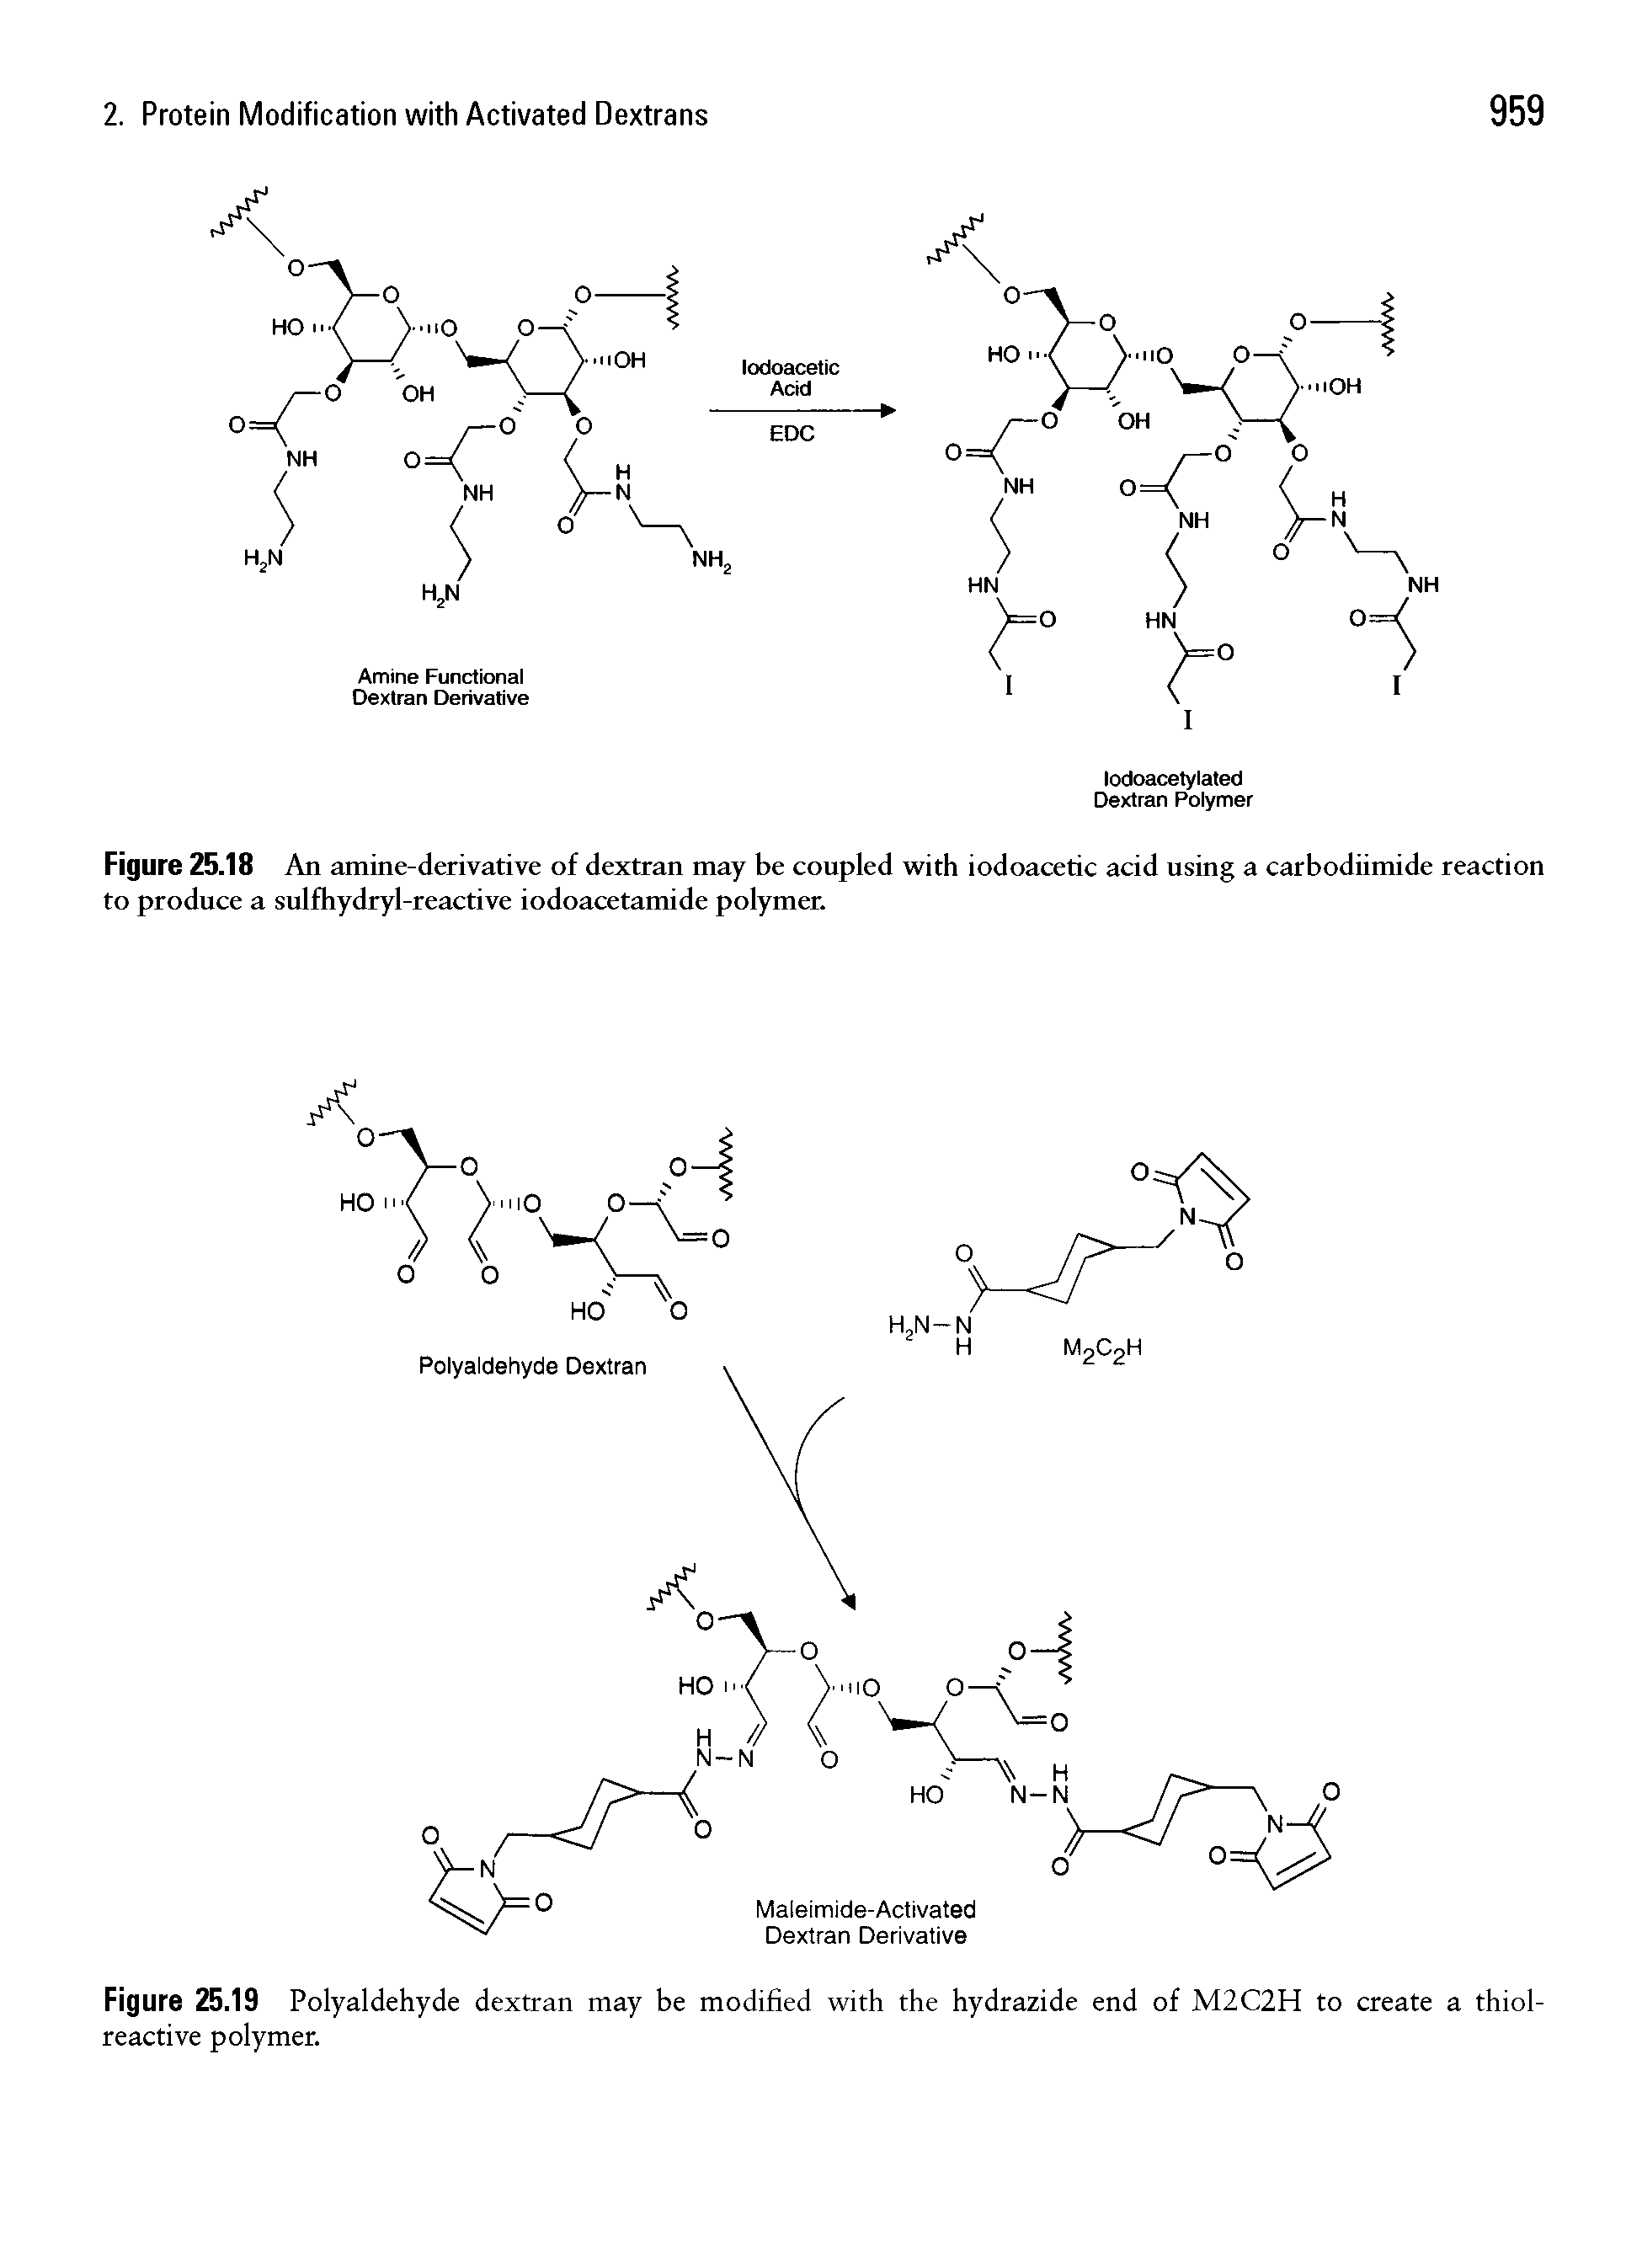 Figure 25.18 An amine-derivative of dextran may be coupled with iodoacetic acid using a carbodiimide reaction to produce a sulfhydryl-reactive iodoacetamide polymer.